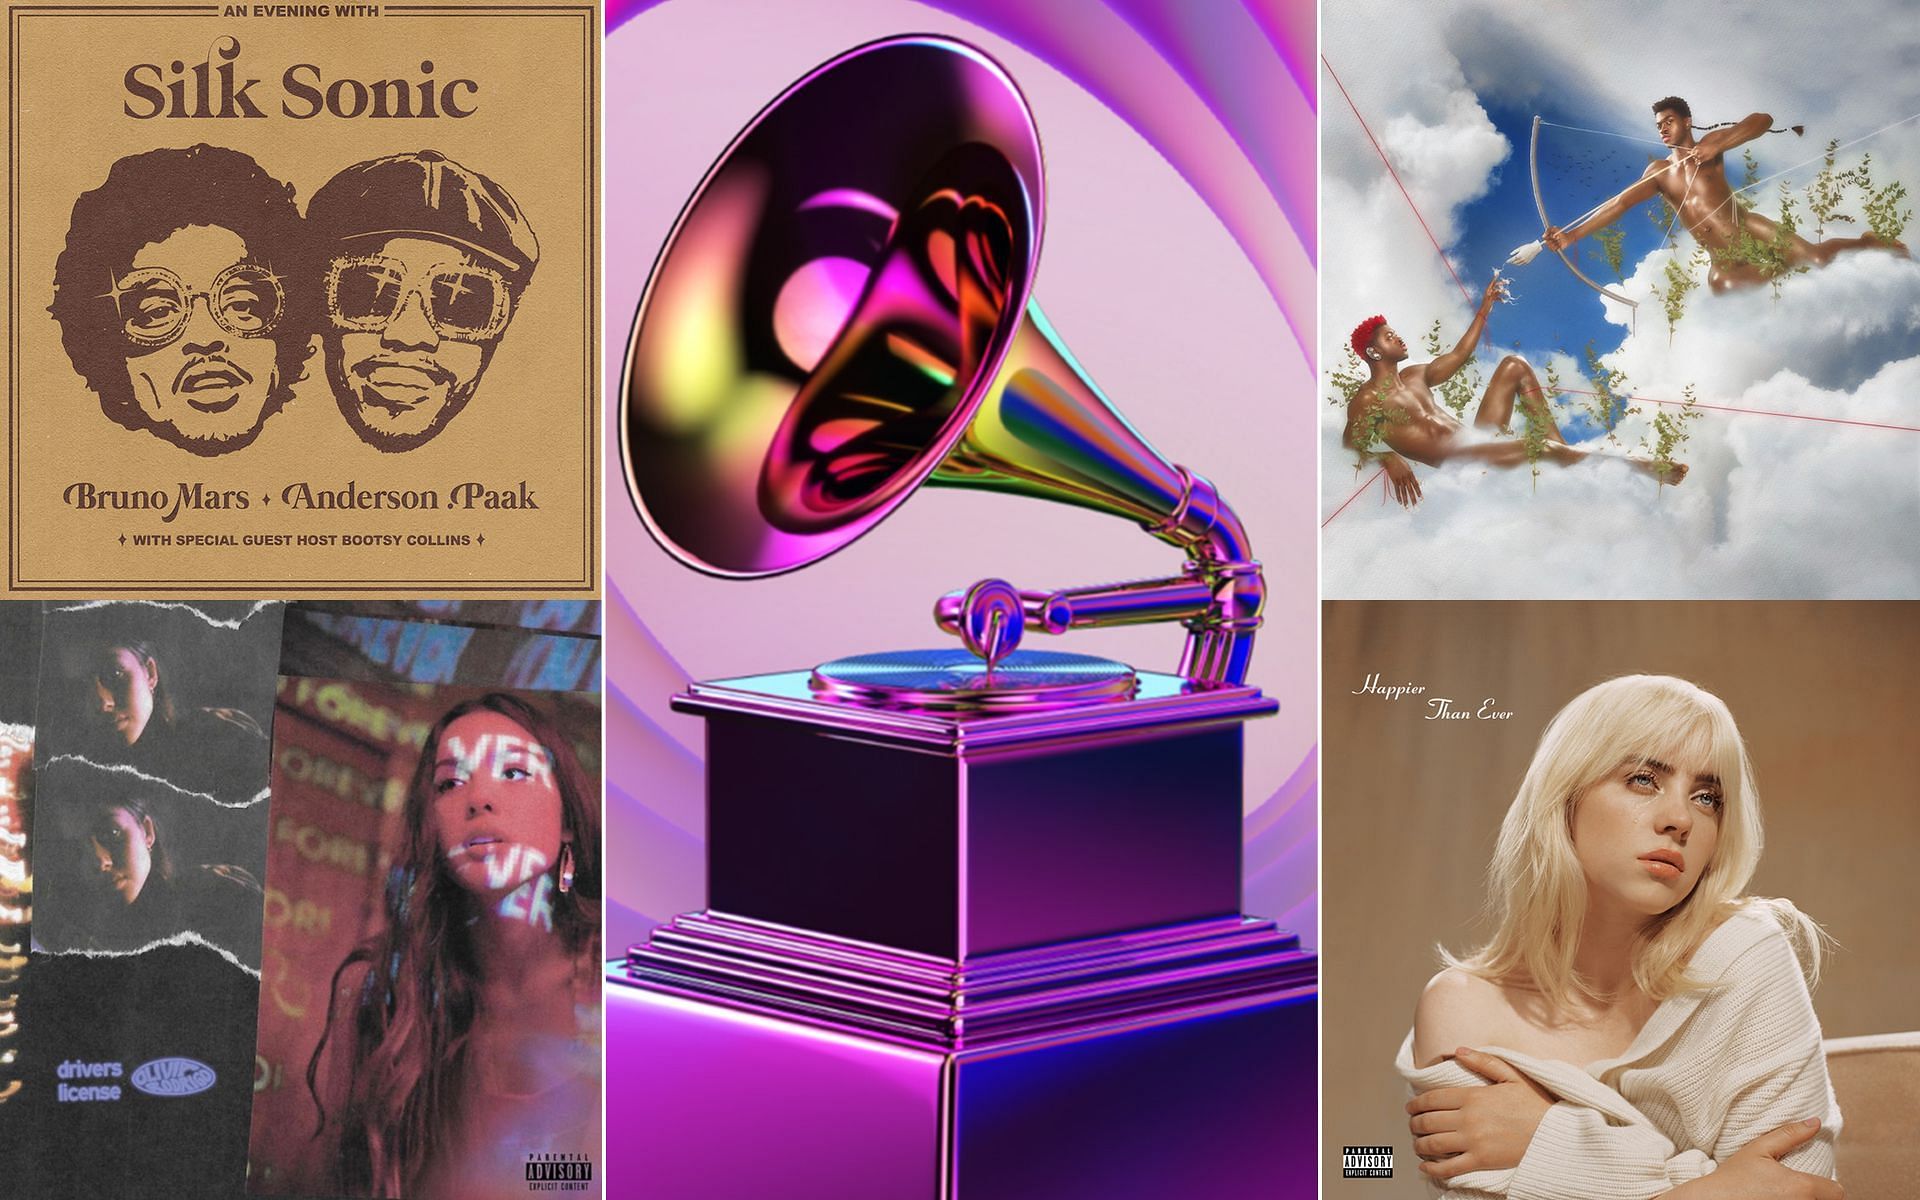 As of this year, the Academy has increased the number of nominees in overall Grammy categories to 10, leading to a stacked and diverse list. (Images via GRAMMY.com)